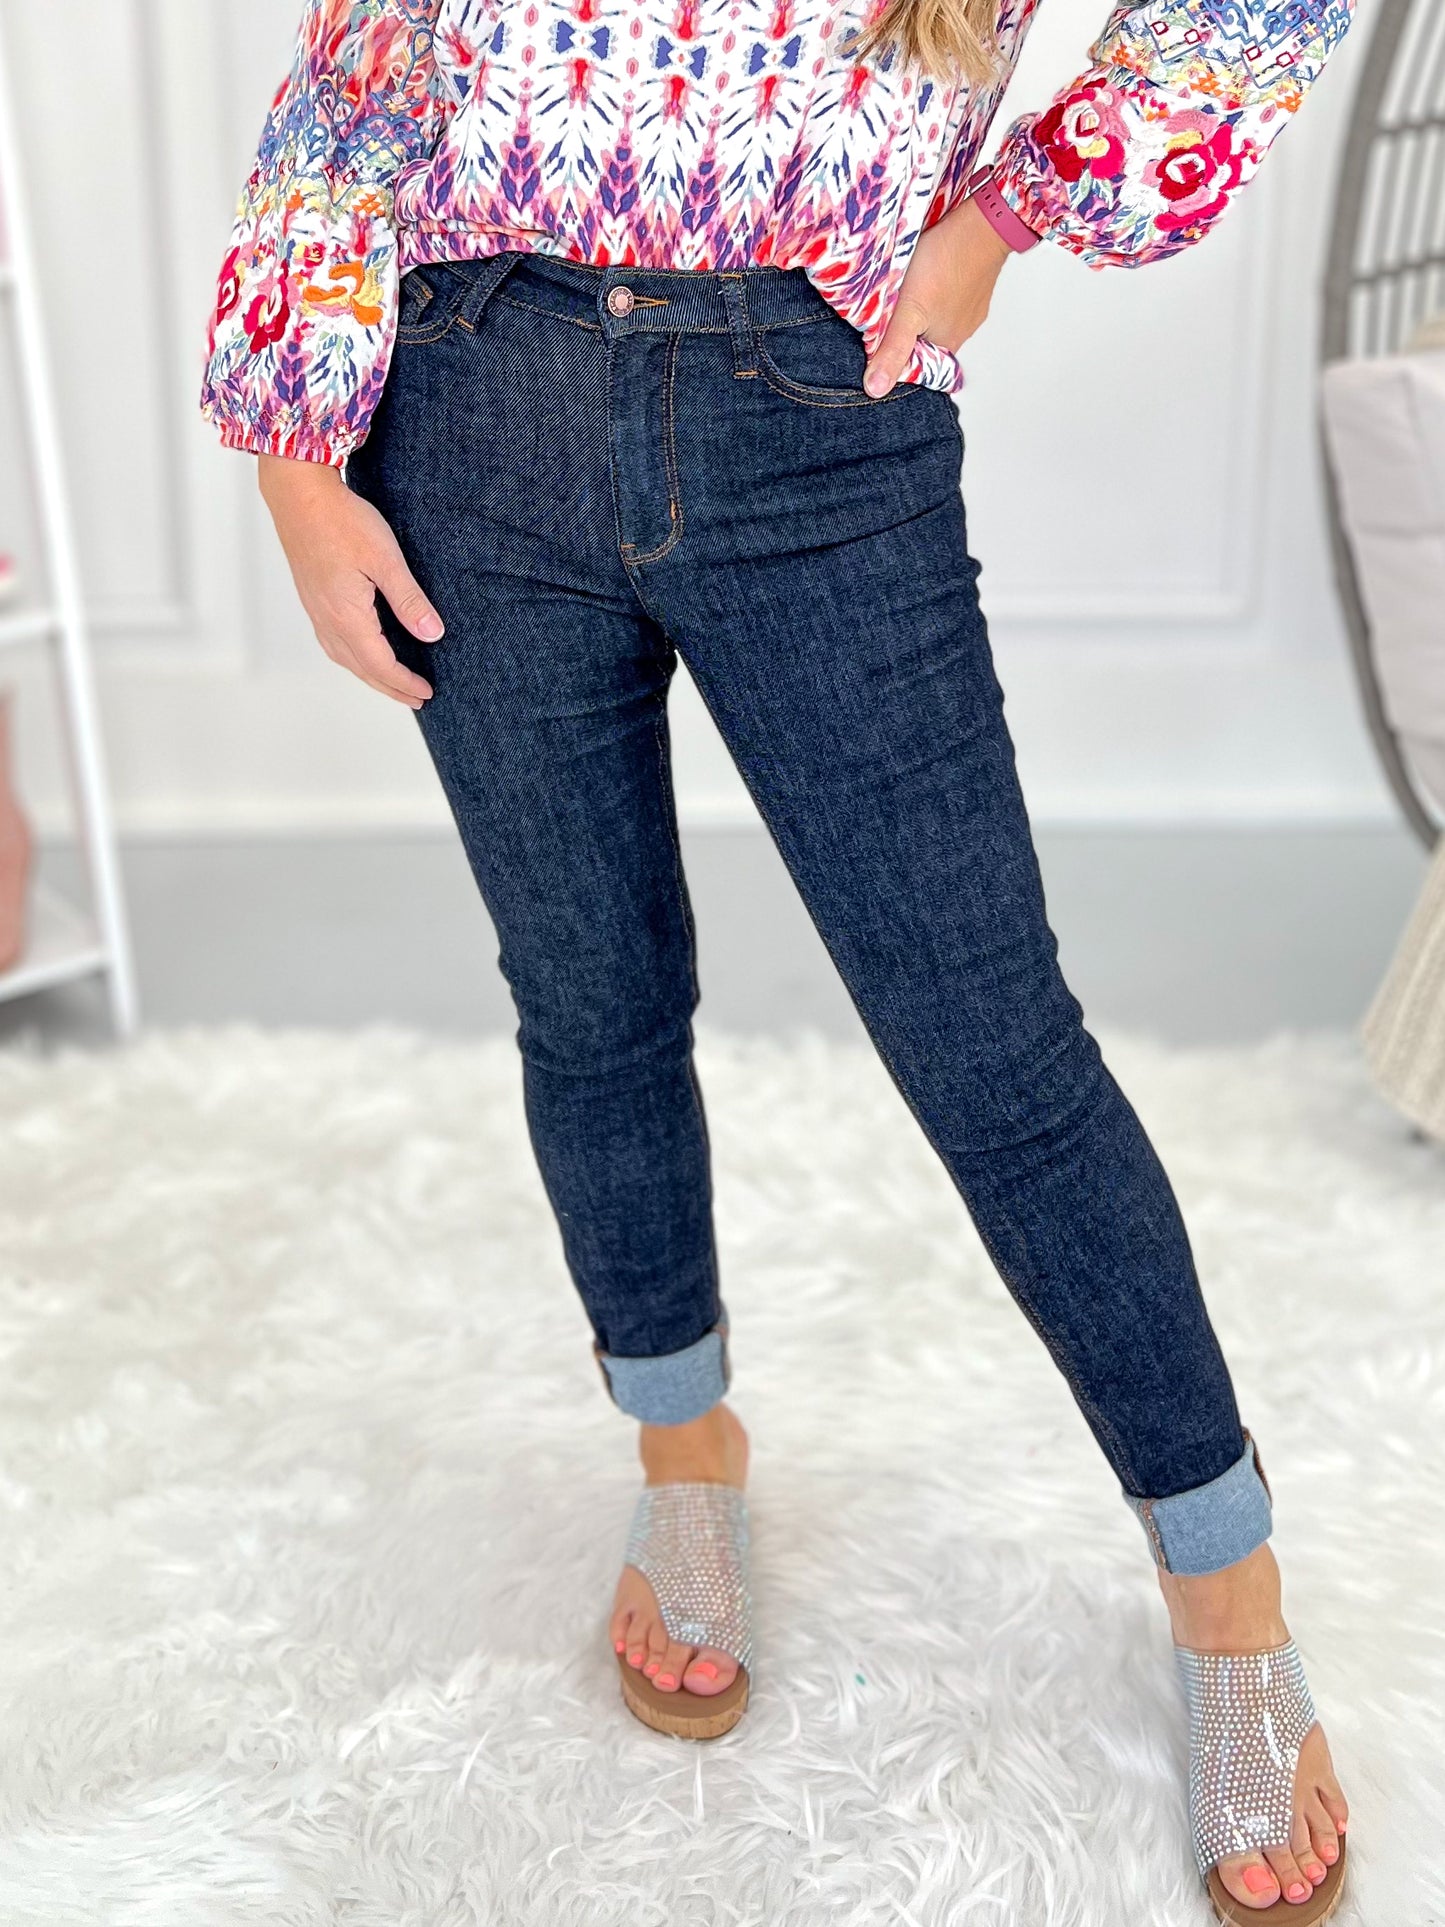 Judy Blue Classic Back Pocket Embroidered Skinny Jean - Final Sale